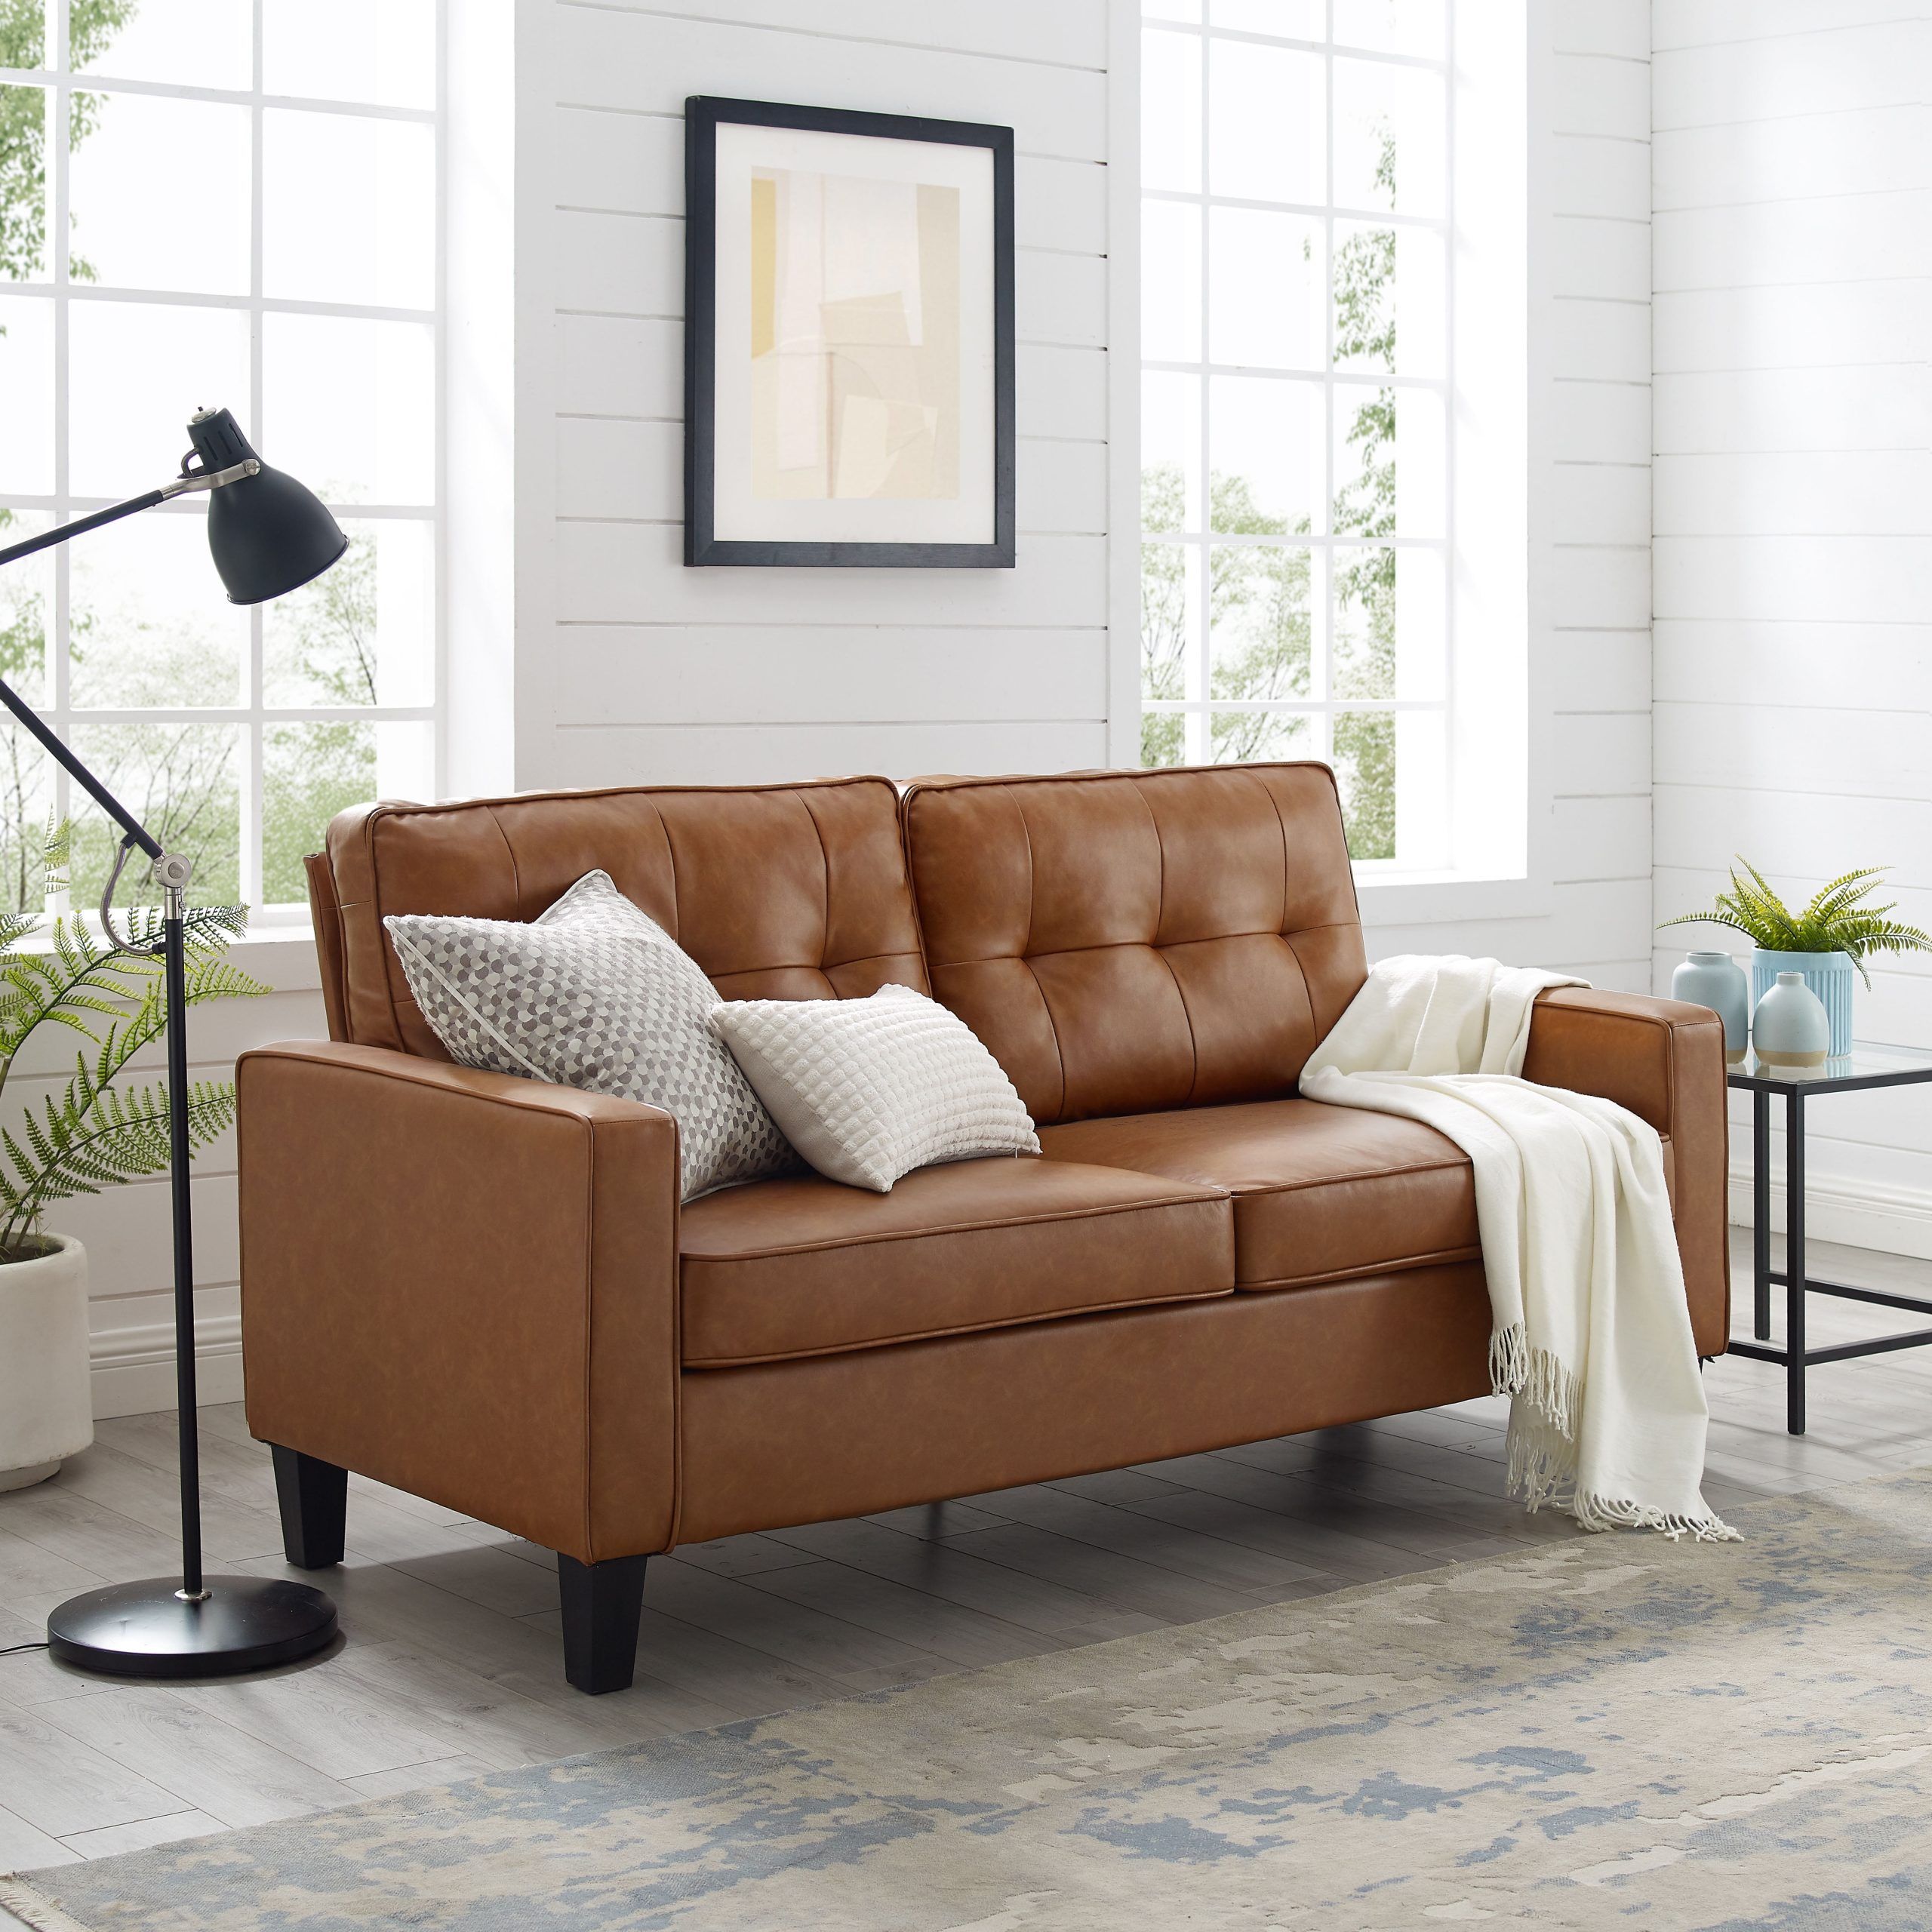 Mainstays Faux Leather Apartment Sofa Brown – Walmart Pertaining To Faux Leather Sofas (Gallery 1 of 21)